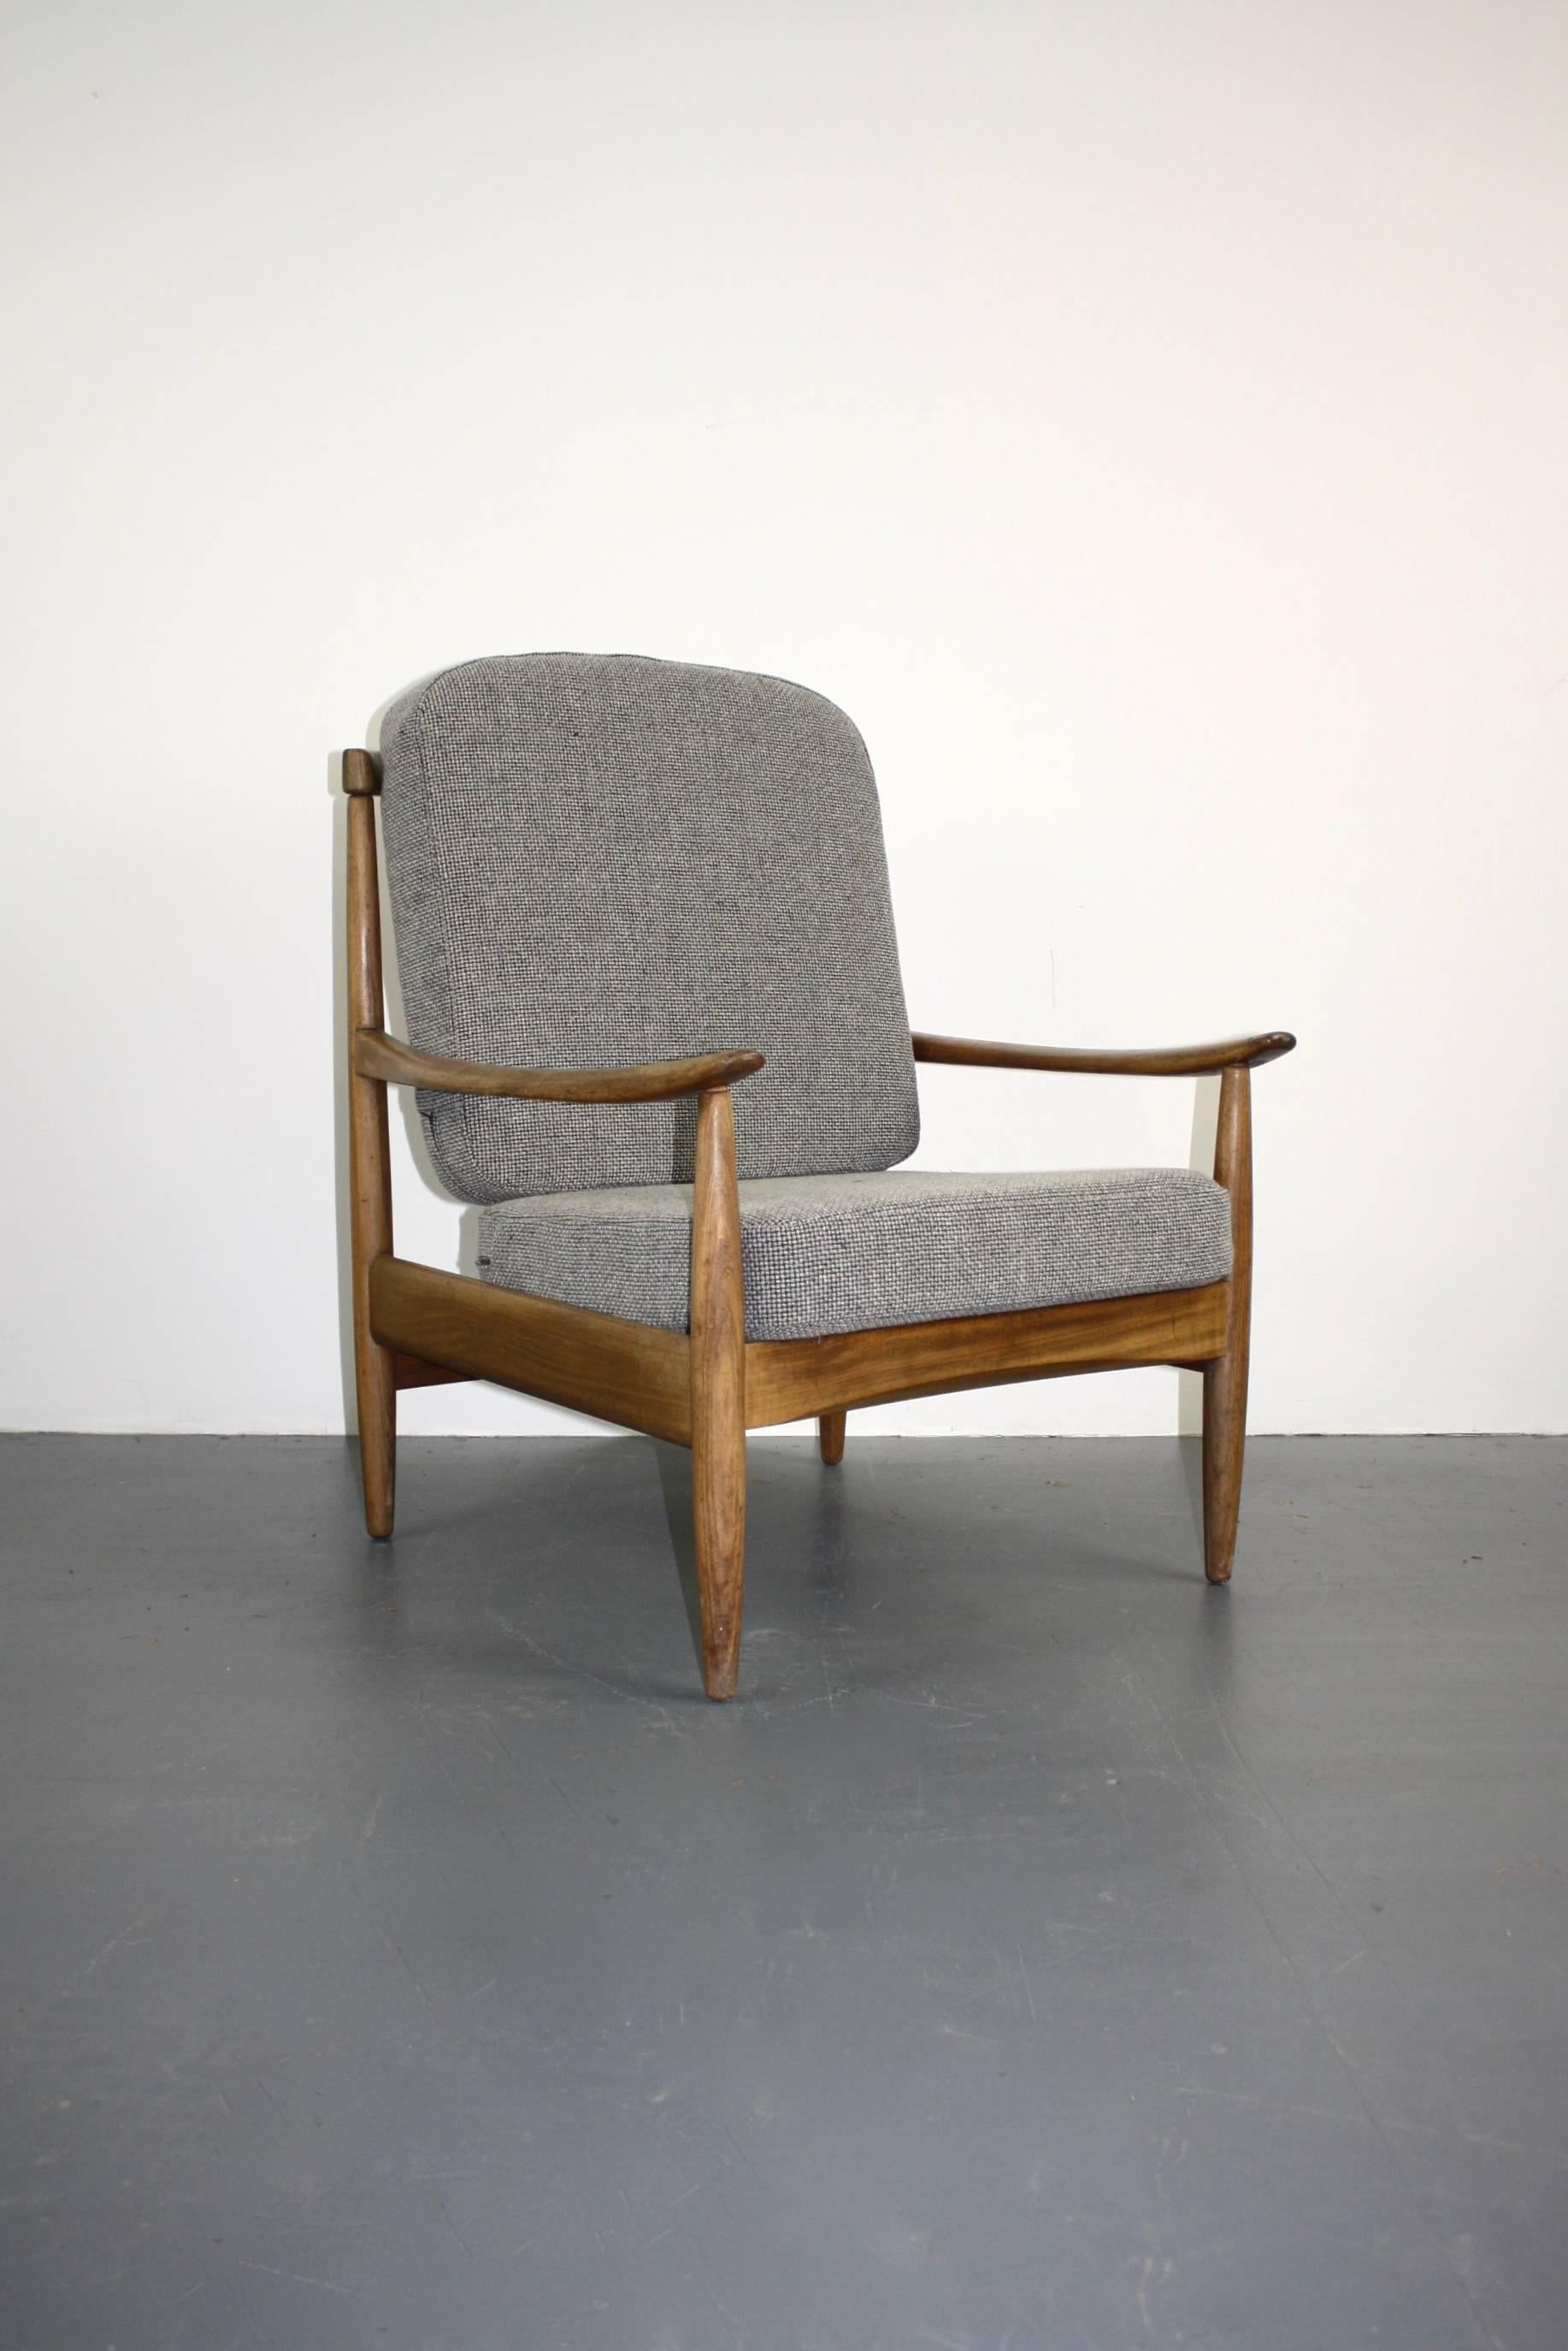 Midcentury Danish design teak lounge chair. Lovely patina to the wood and a finely made piece.

Newly upholstered in a Romo fabric, with new seat webbing.

Condition-wise, there are some small signs of wear, commensurate with age, nothing major